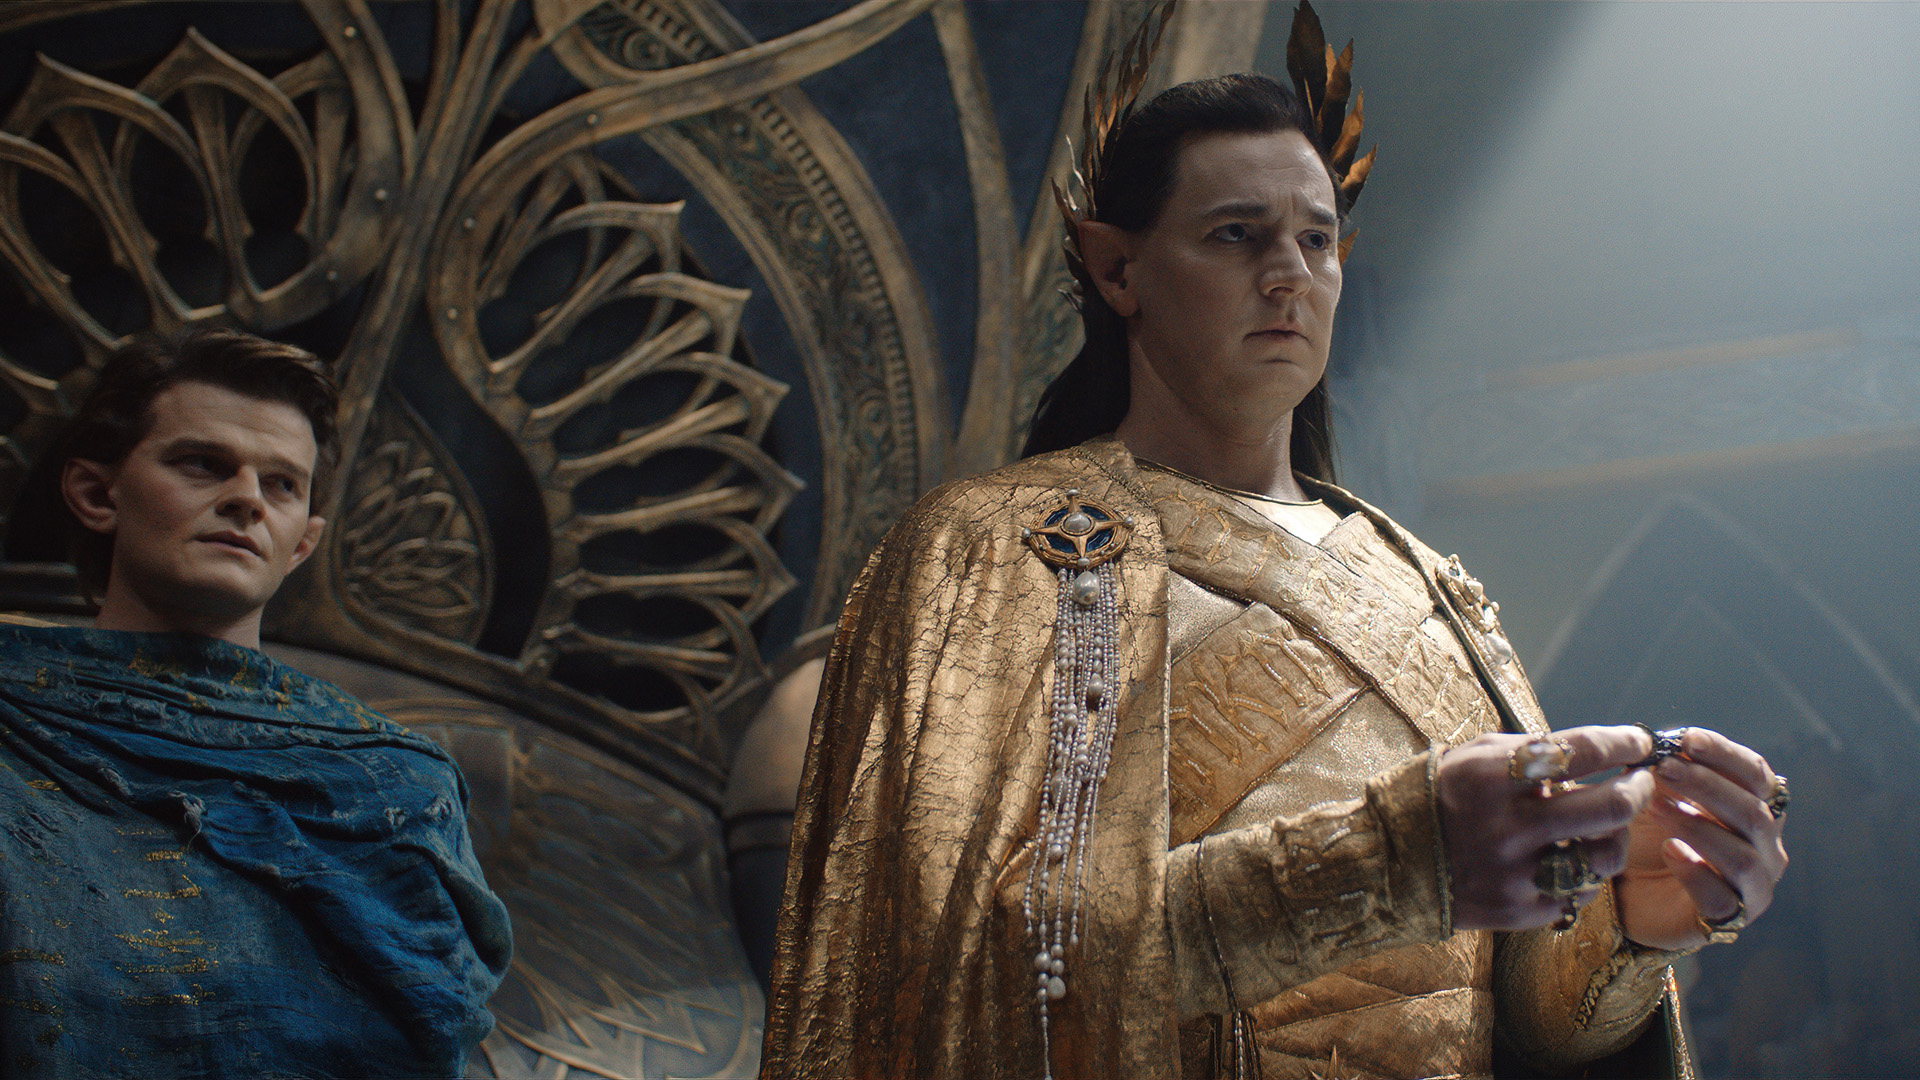 Gil-galad holds a piece of mithril as Elrond watches on in The Rings of Power episode 8